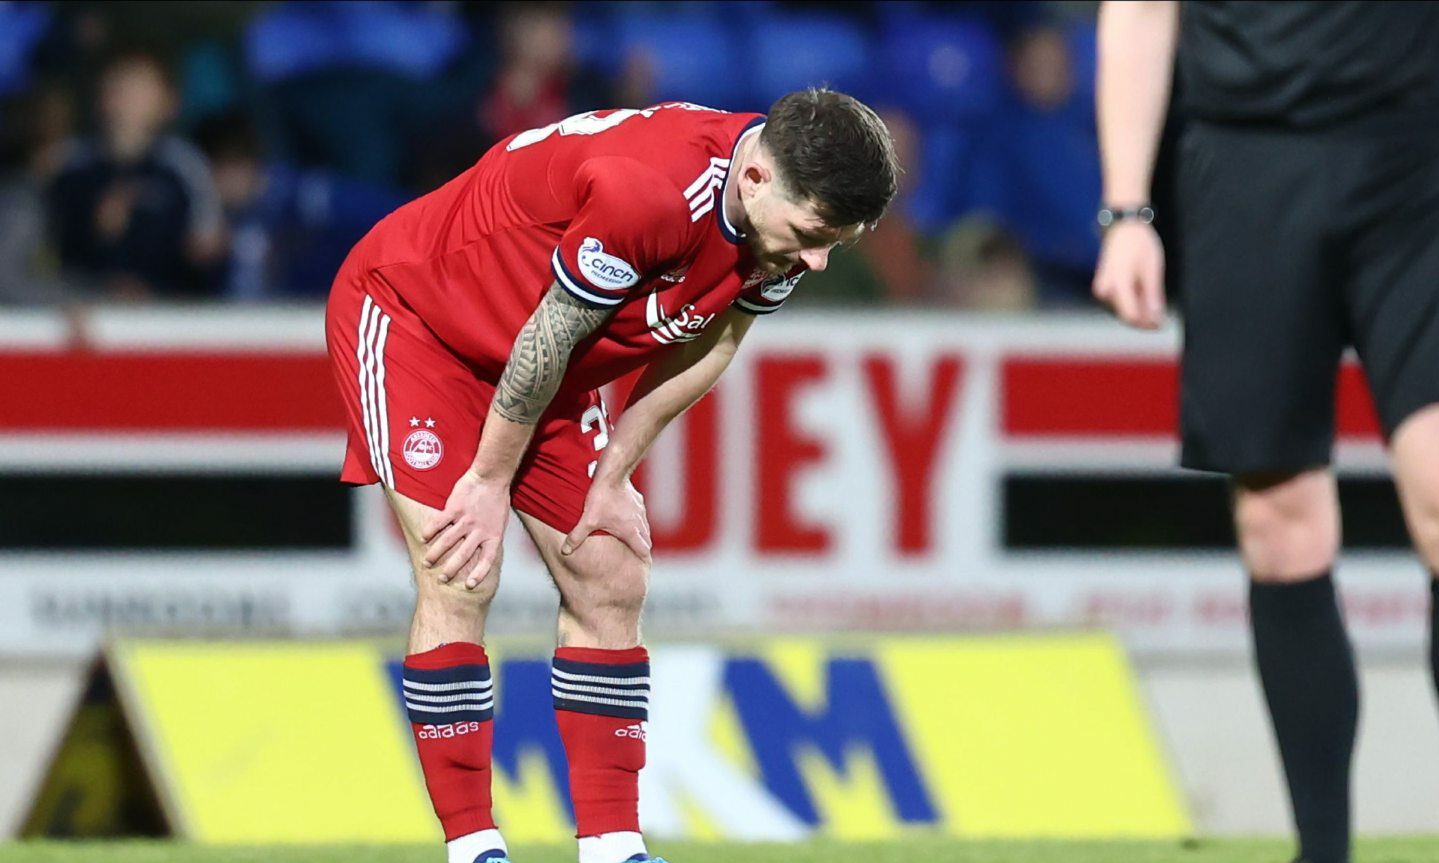 Aberdeen's Matty Kennedy looks dejected after their defeat against St Johnstone